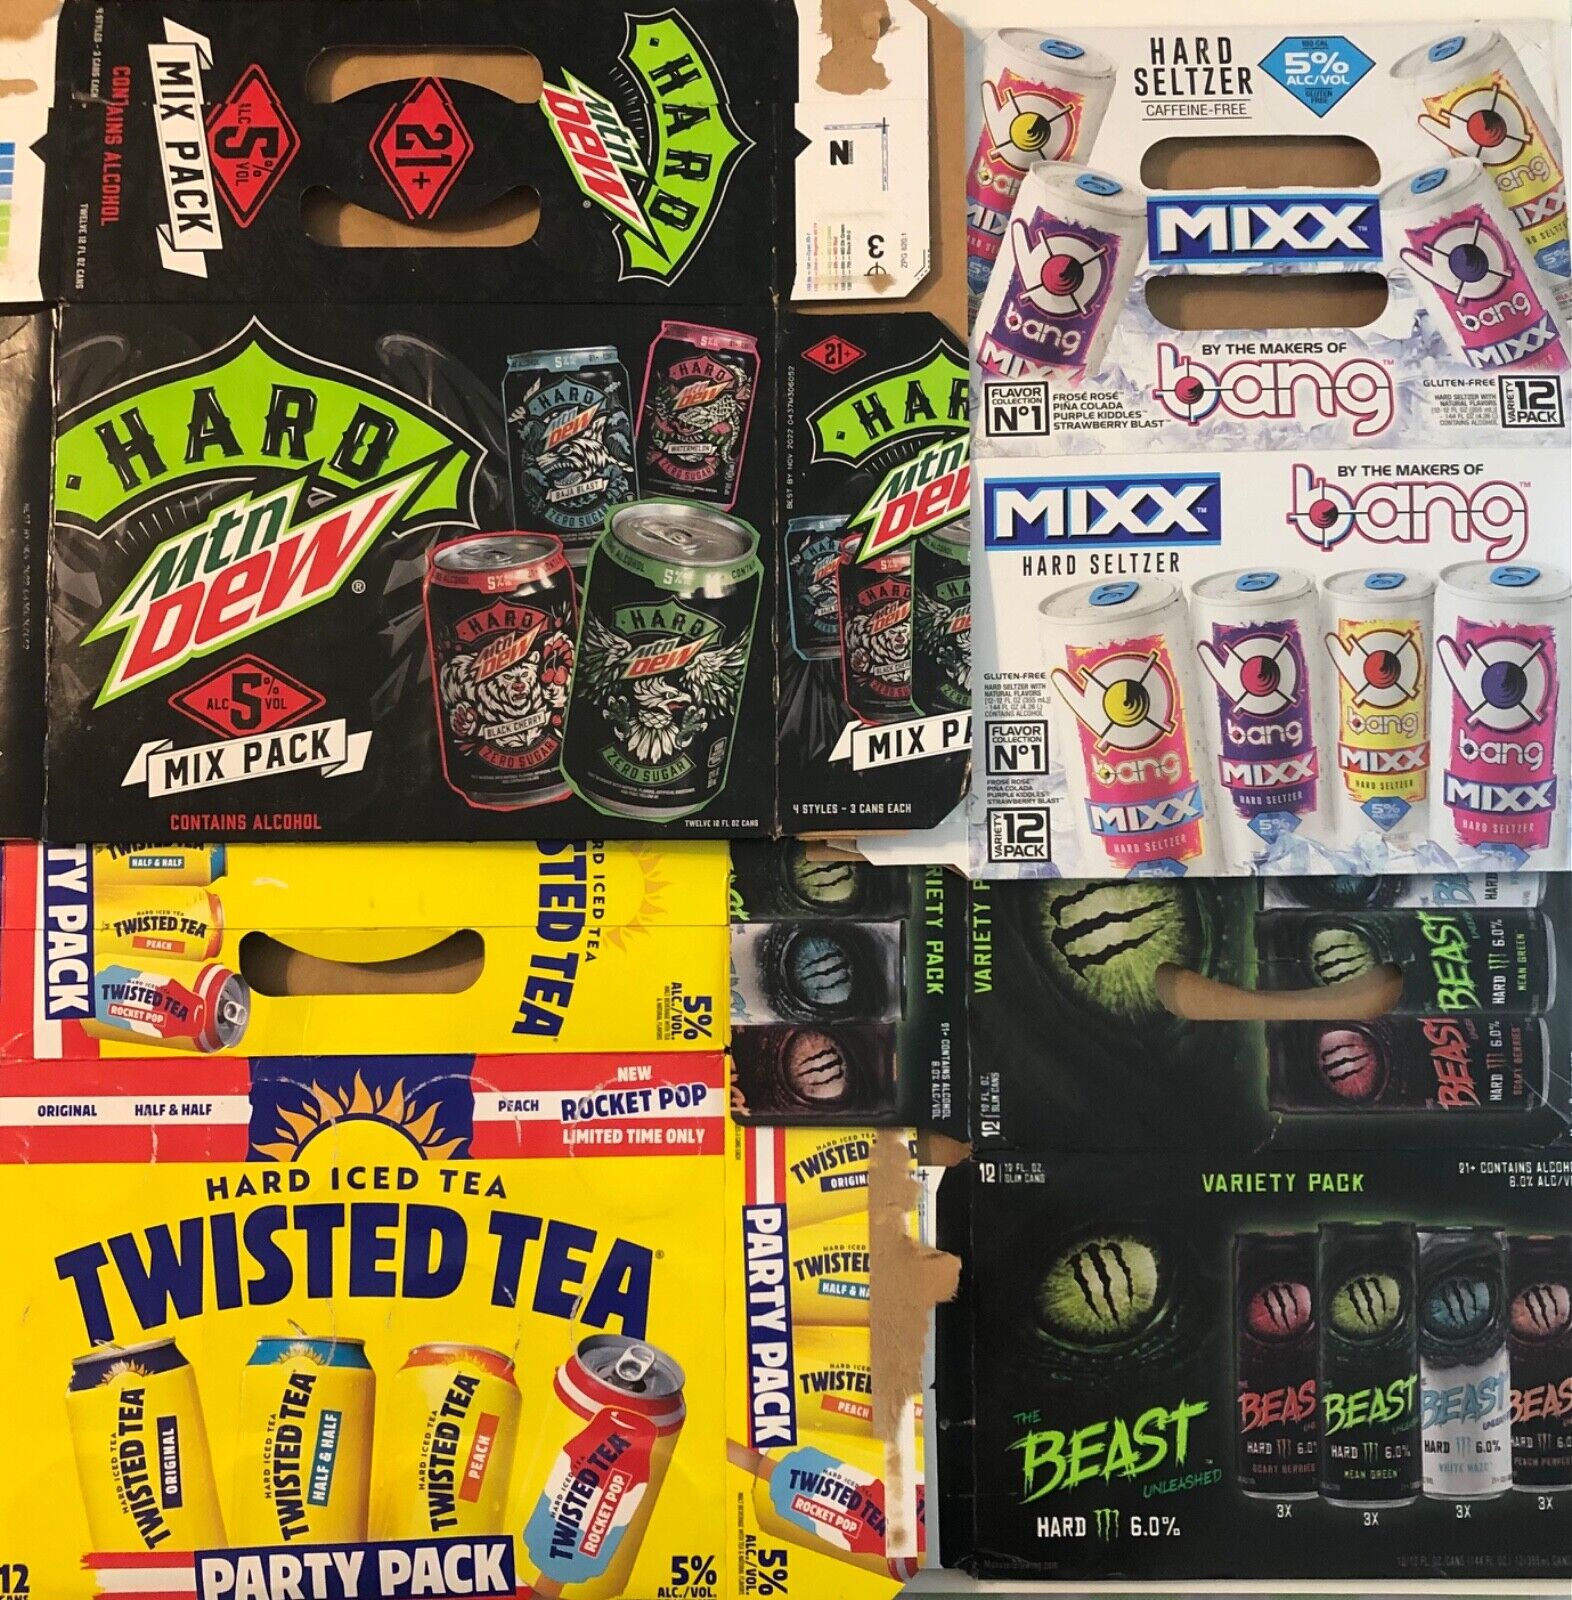 EMPTY | Hard Mtn Dew Bang Mixx Hard Seltzer Monster Twisted Tea Party Pack Boxes